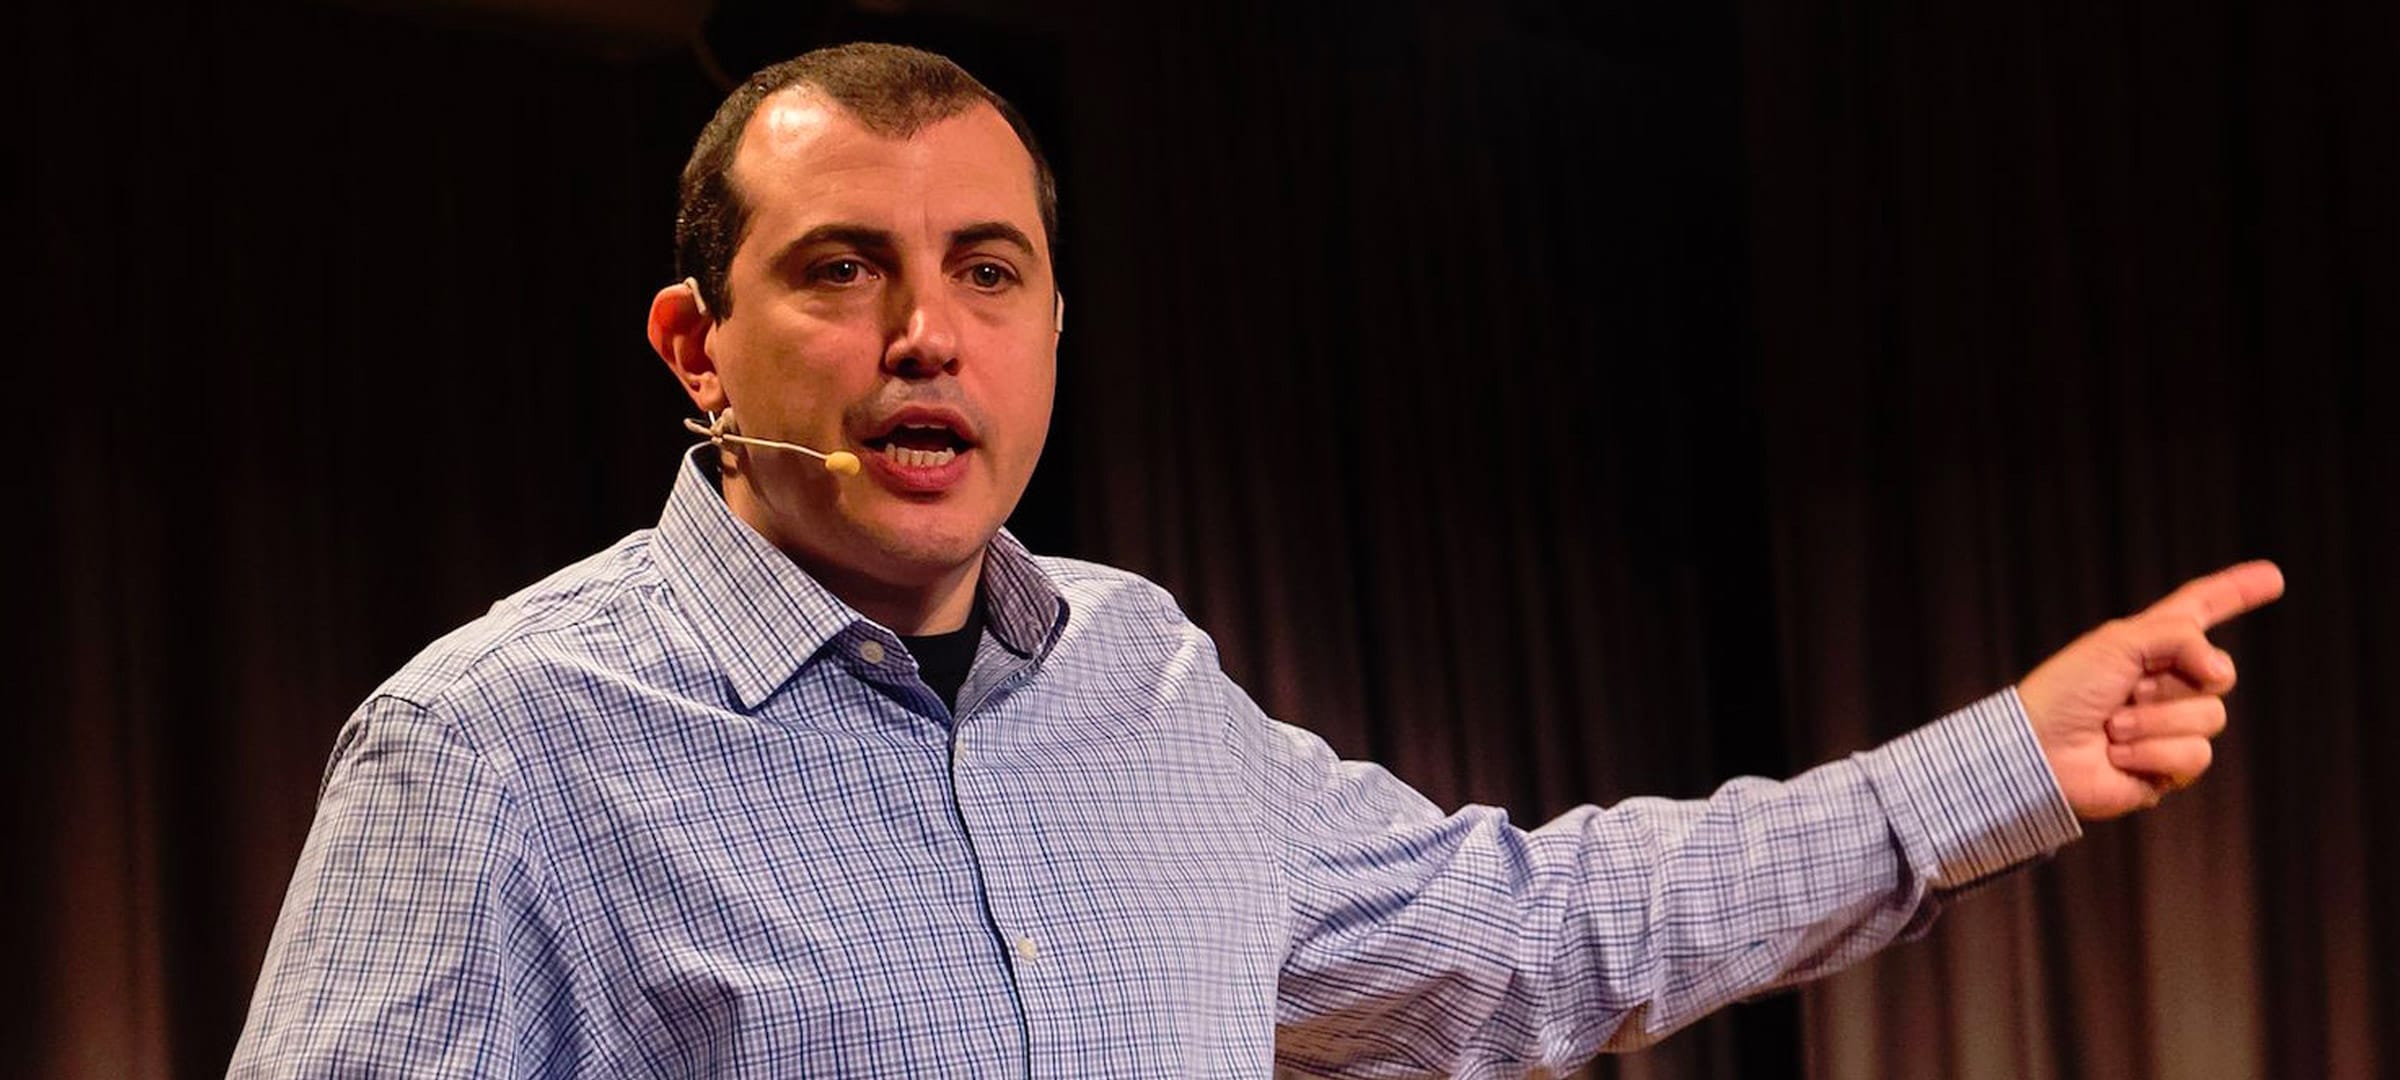 One of Bitcoin’s absolute heroes: Andreas Antonopoulos